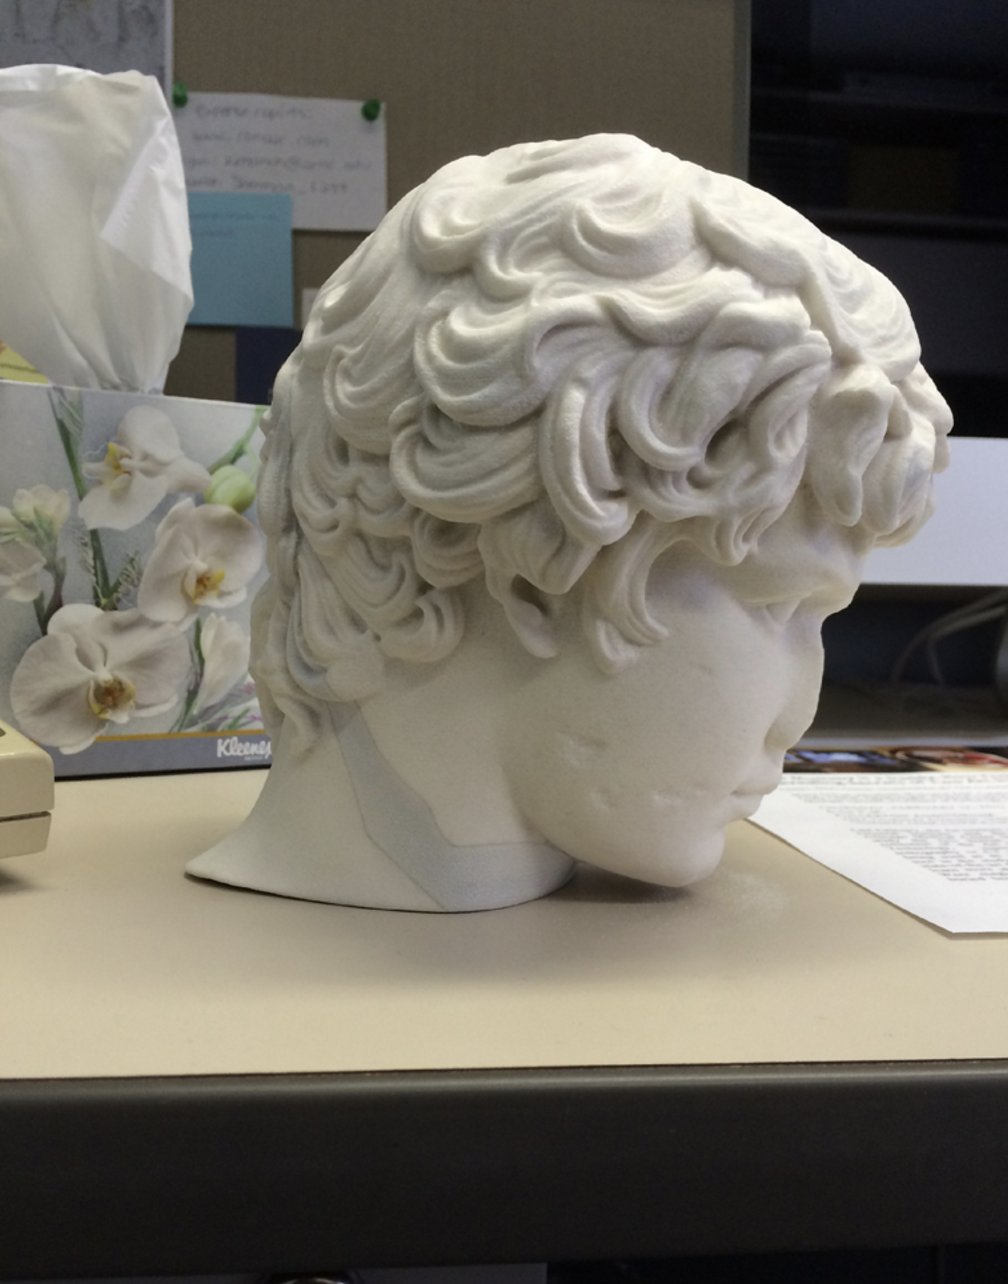 A printed full-scale model shows the complete integration of the head of the Bust of Antinous